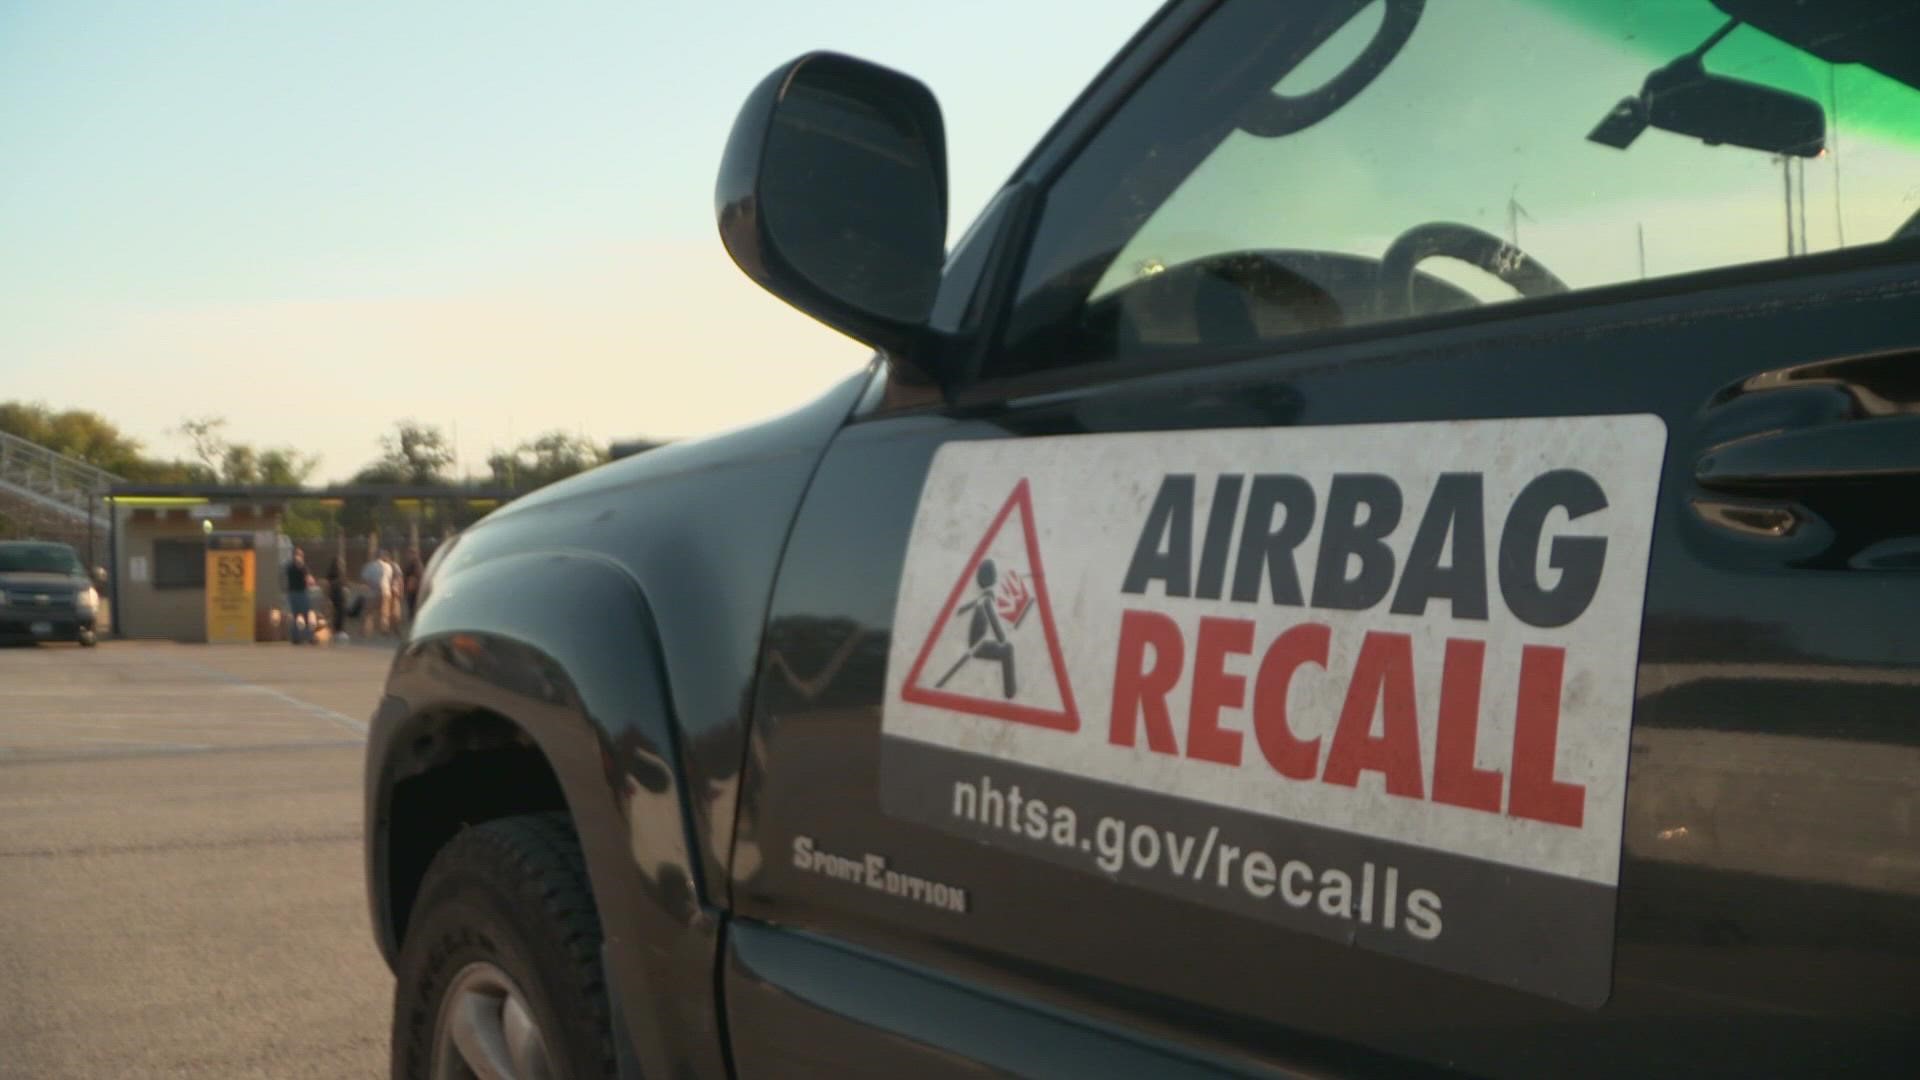 The safety campaign encourages drivers to use their license plate to check if their airbags are on recall.